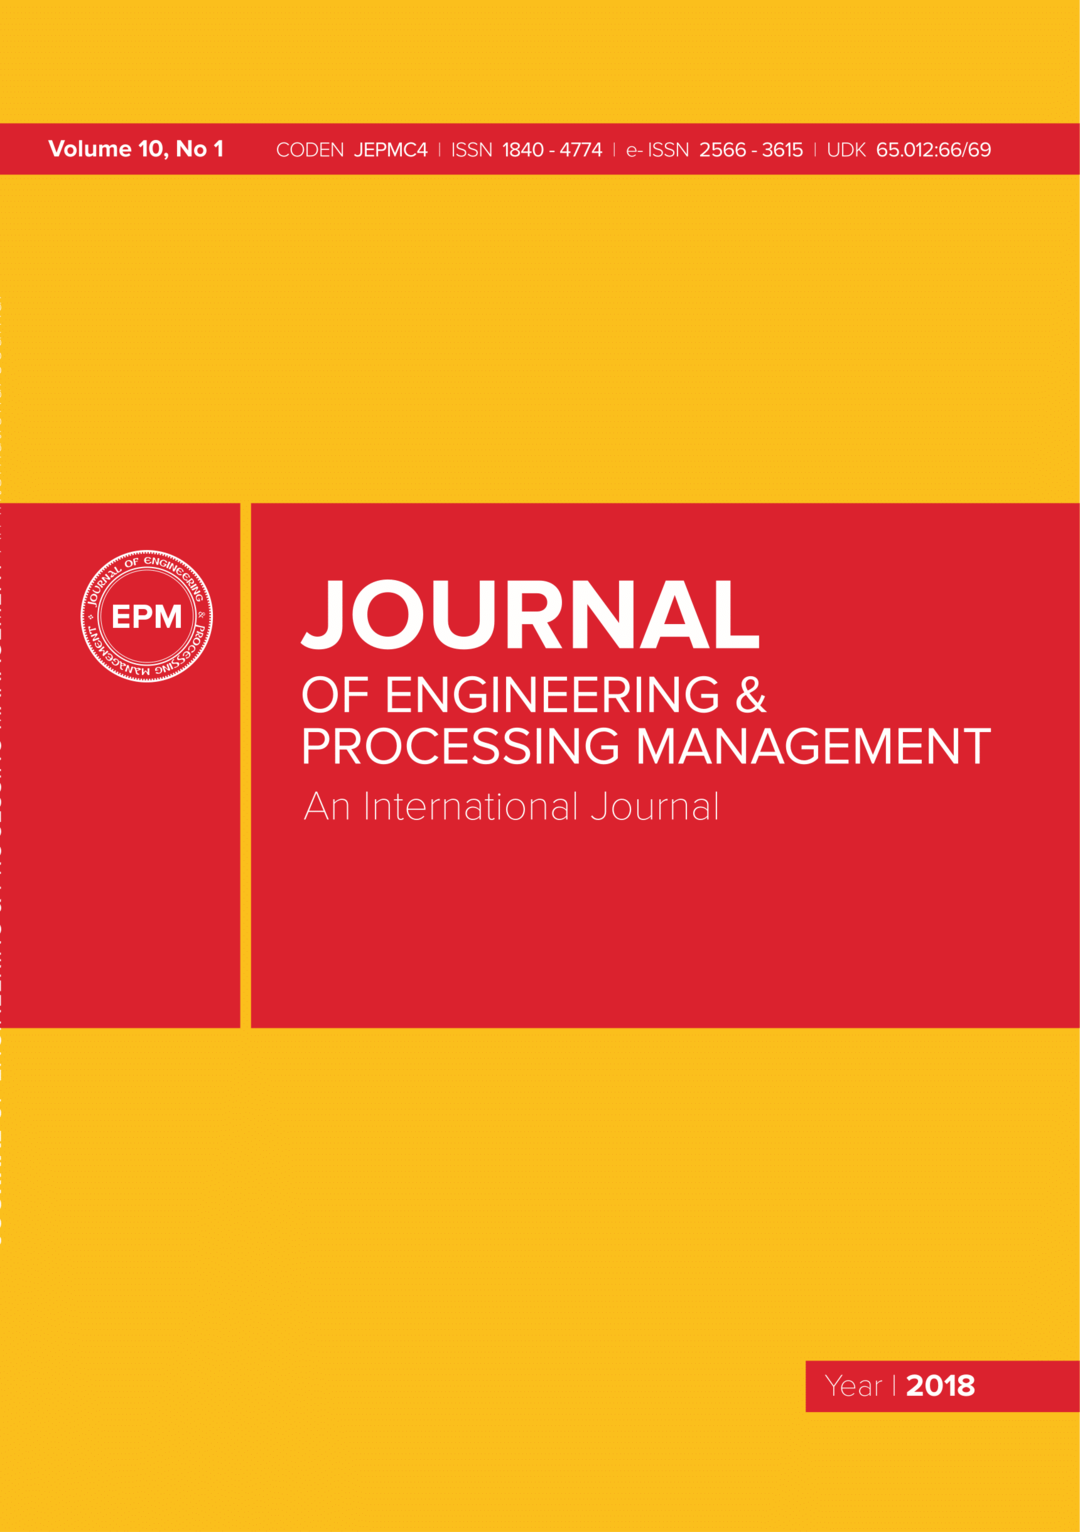 					View Vol. 10 No. 1 (2018): Journal of Engineering & Processing Management 
				